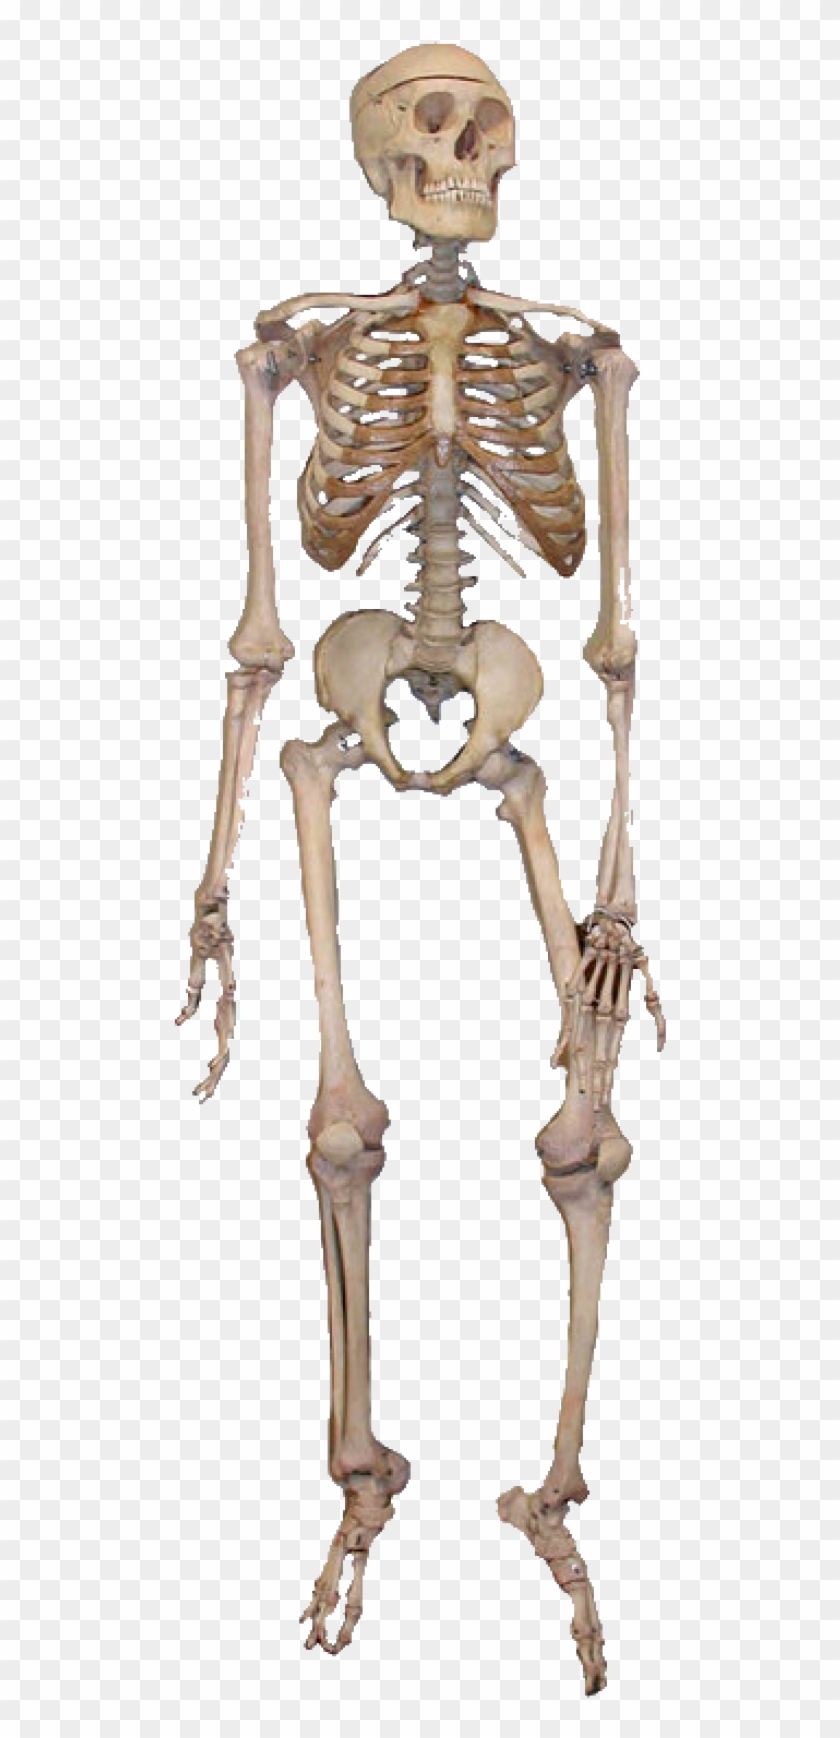 Skeleton Png Free Download - Full Diagram Of The Bones Of The Human Body Clipart #580227